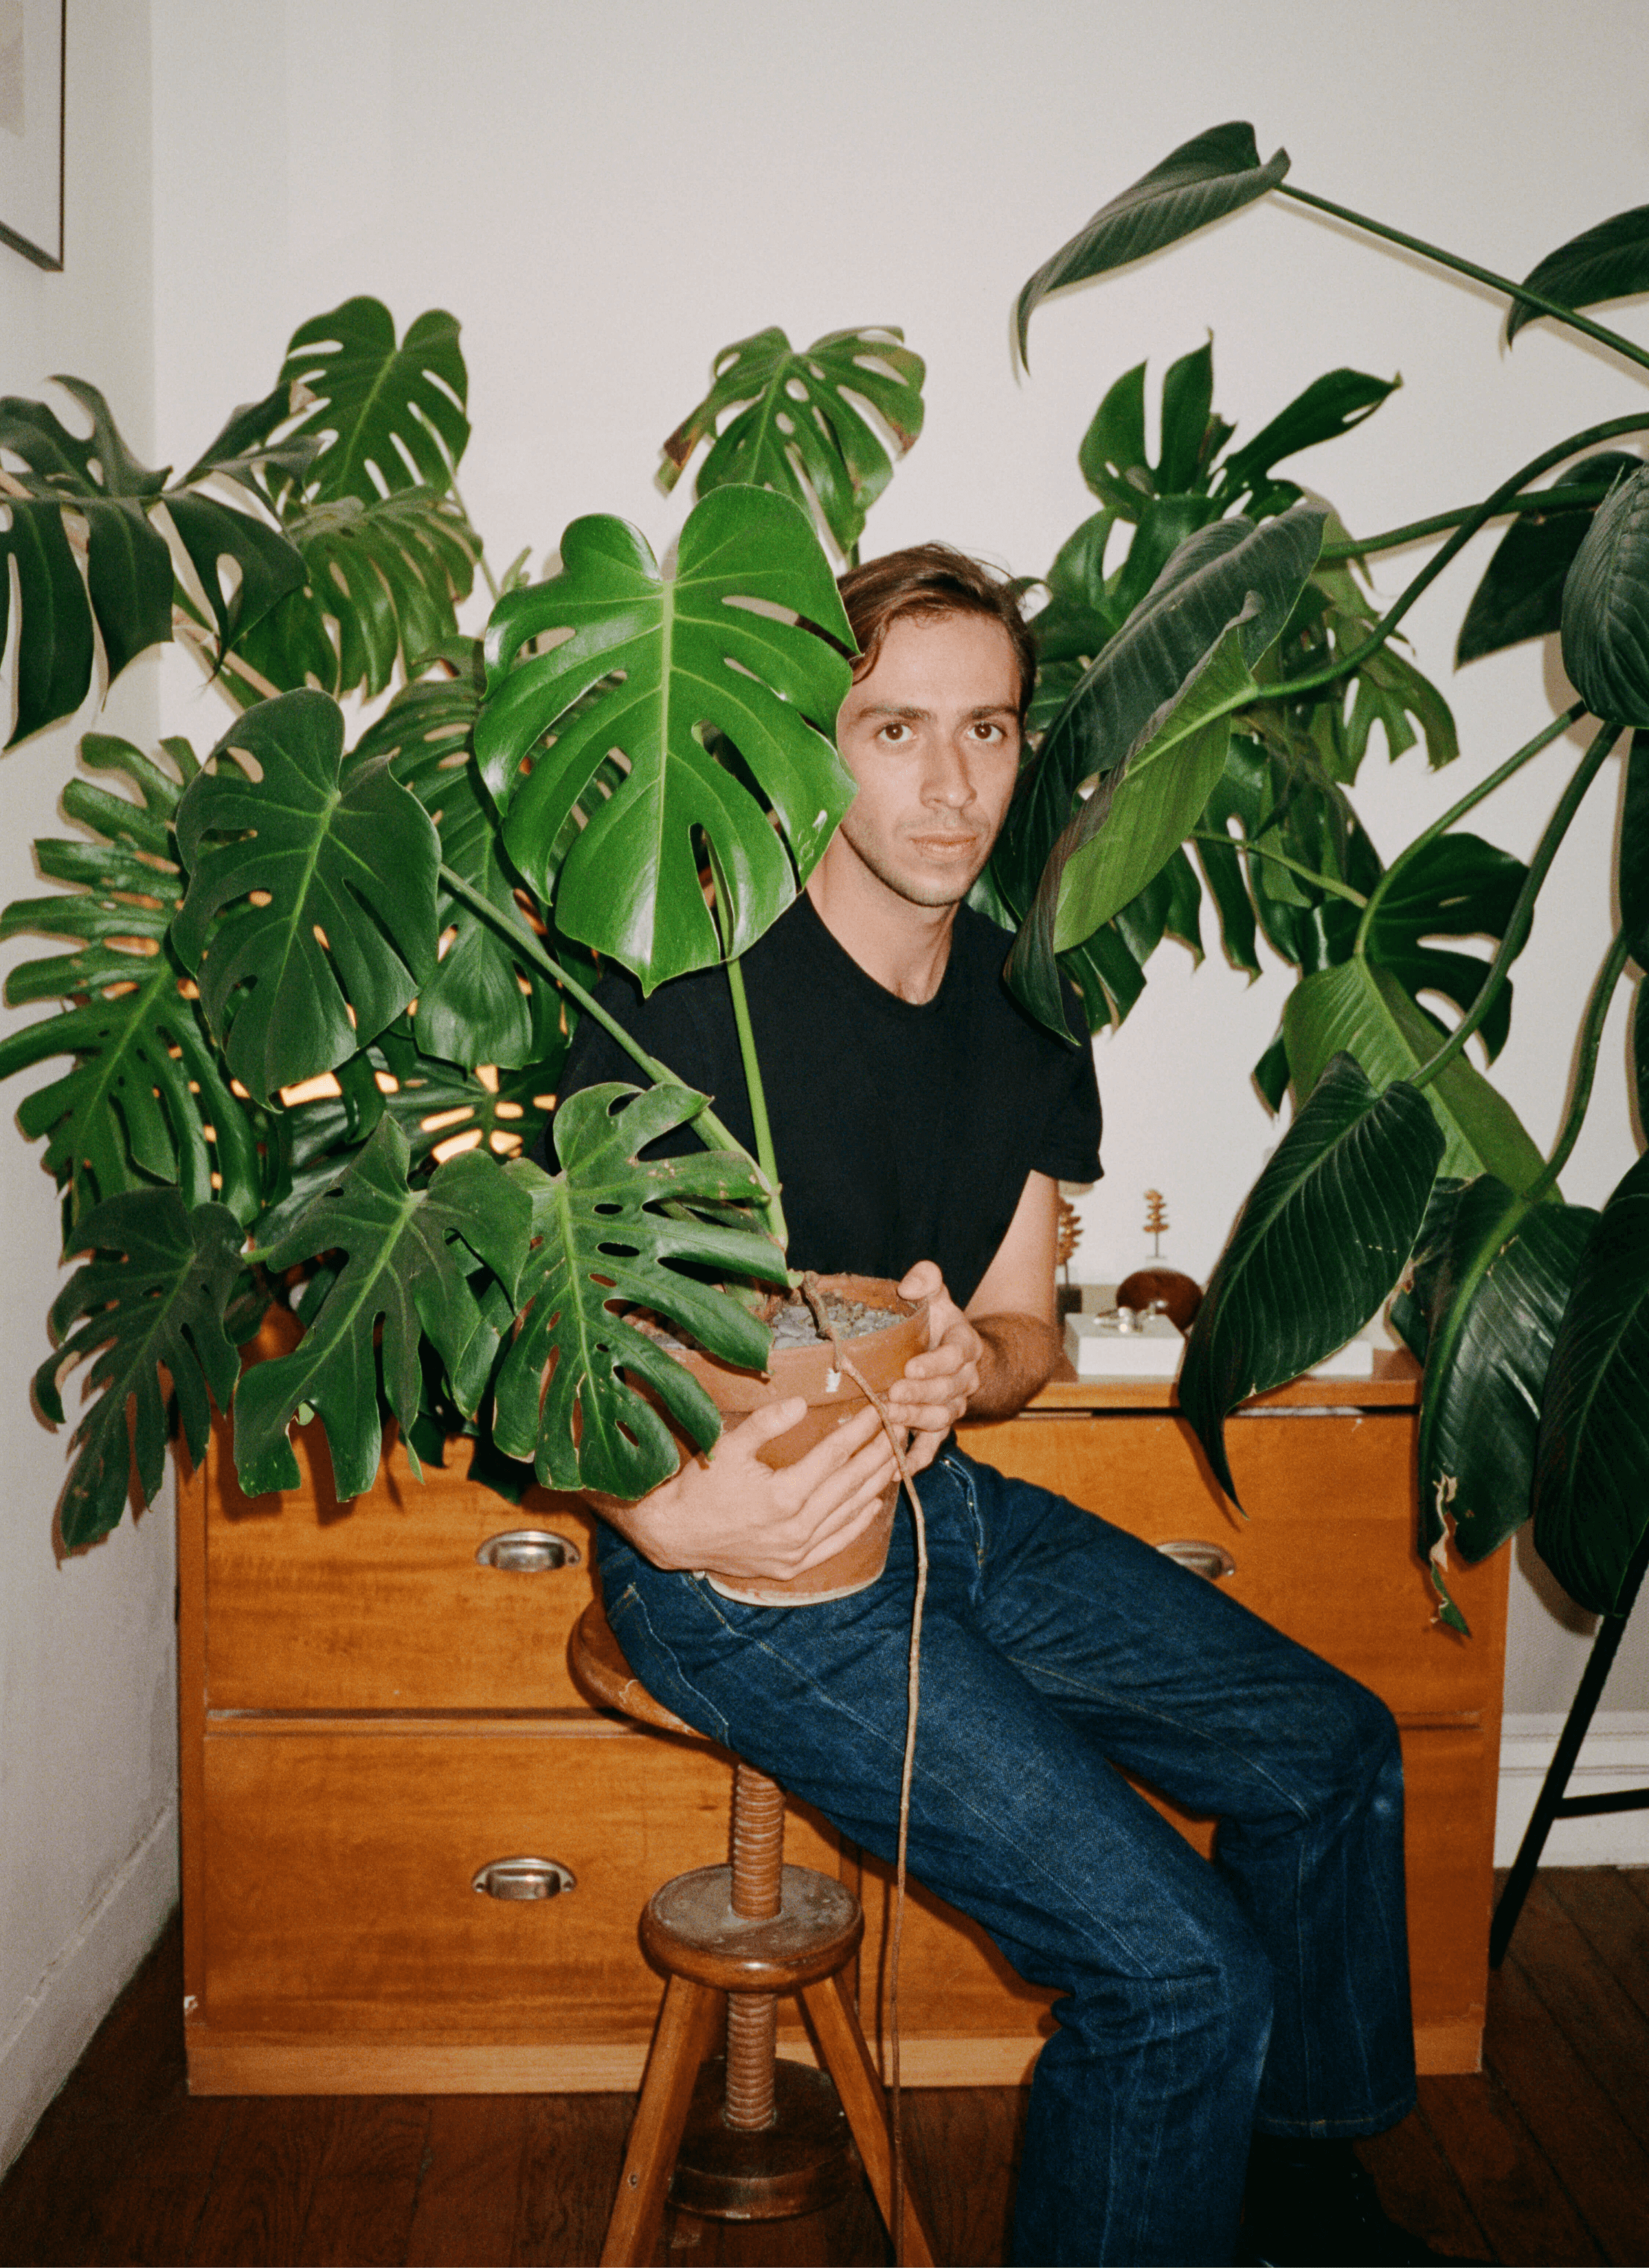 Toni in black t-shirt and a pair of blue jeans while holding a potted monstera in his arms sitting on a chair. There is other plants around him and there is a cupboard behind him align with the wall.